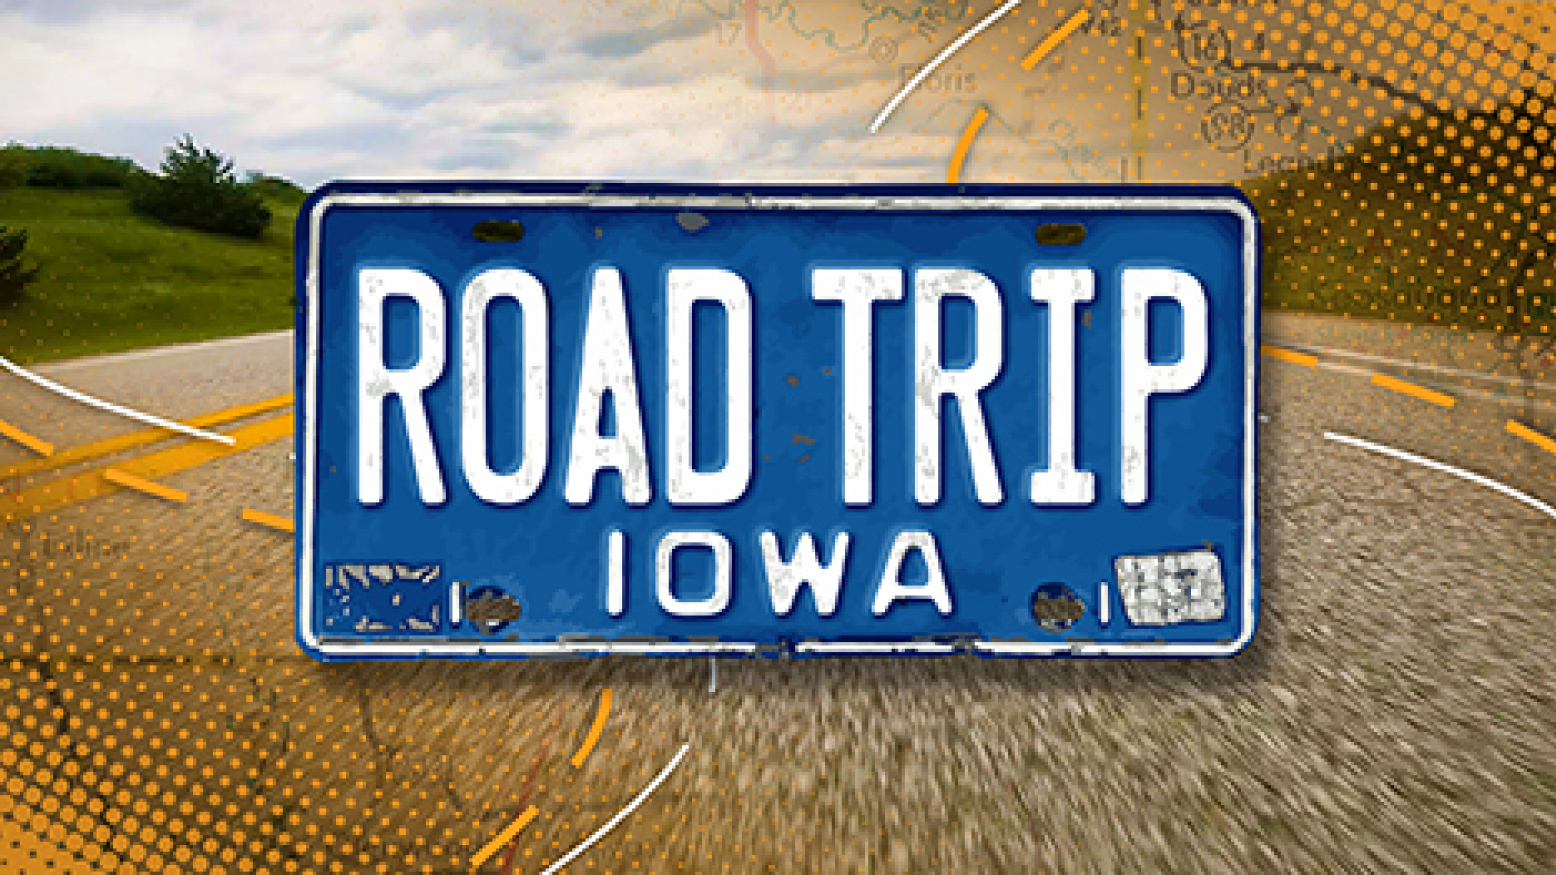 An Iowa blue license plate that says, "ROAD TRIP IOWA" overlayed on a rural road scene.